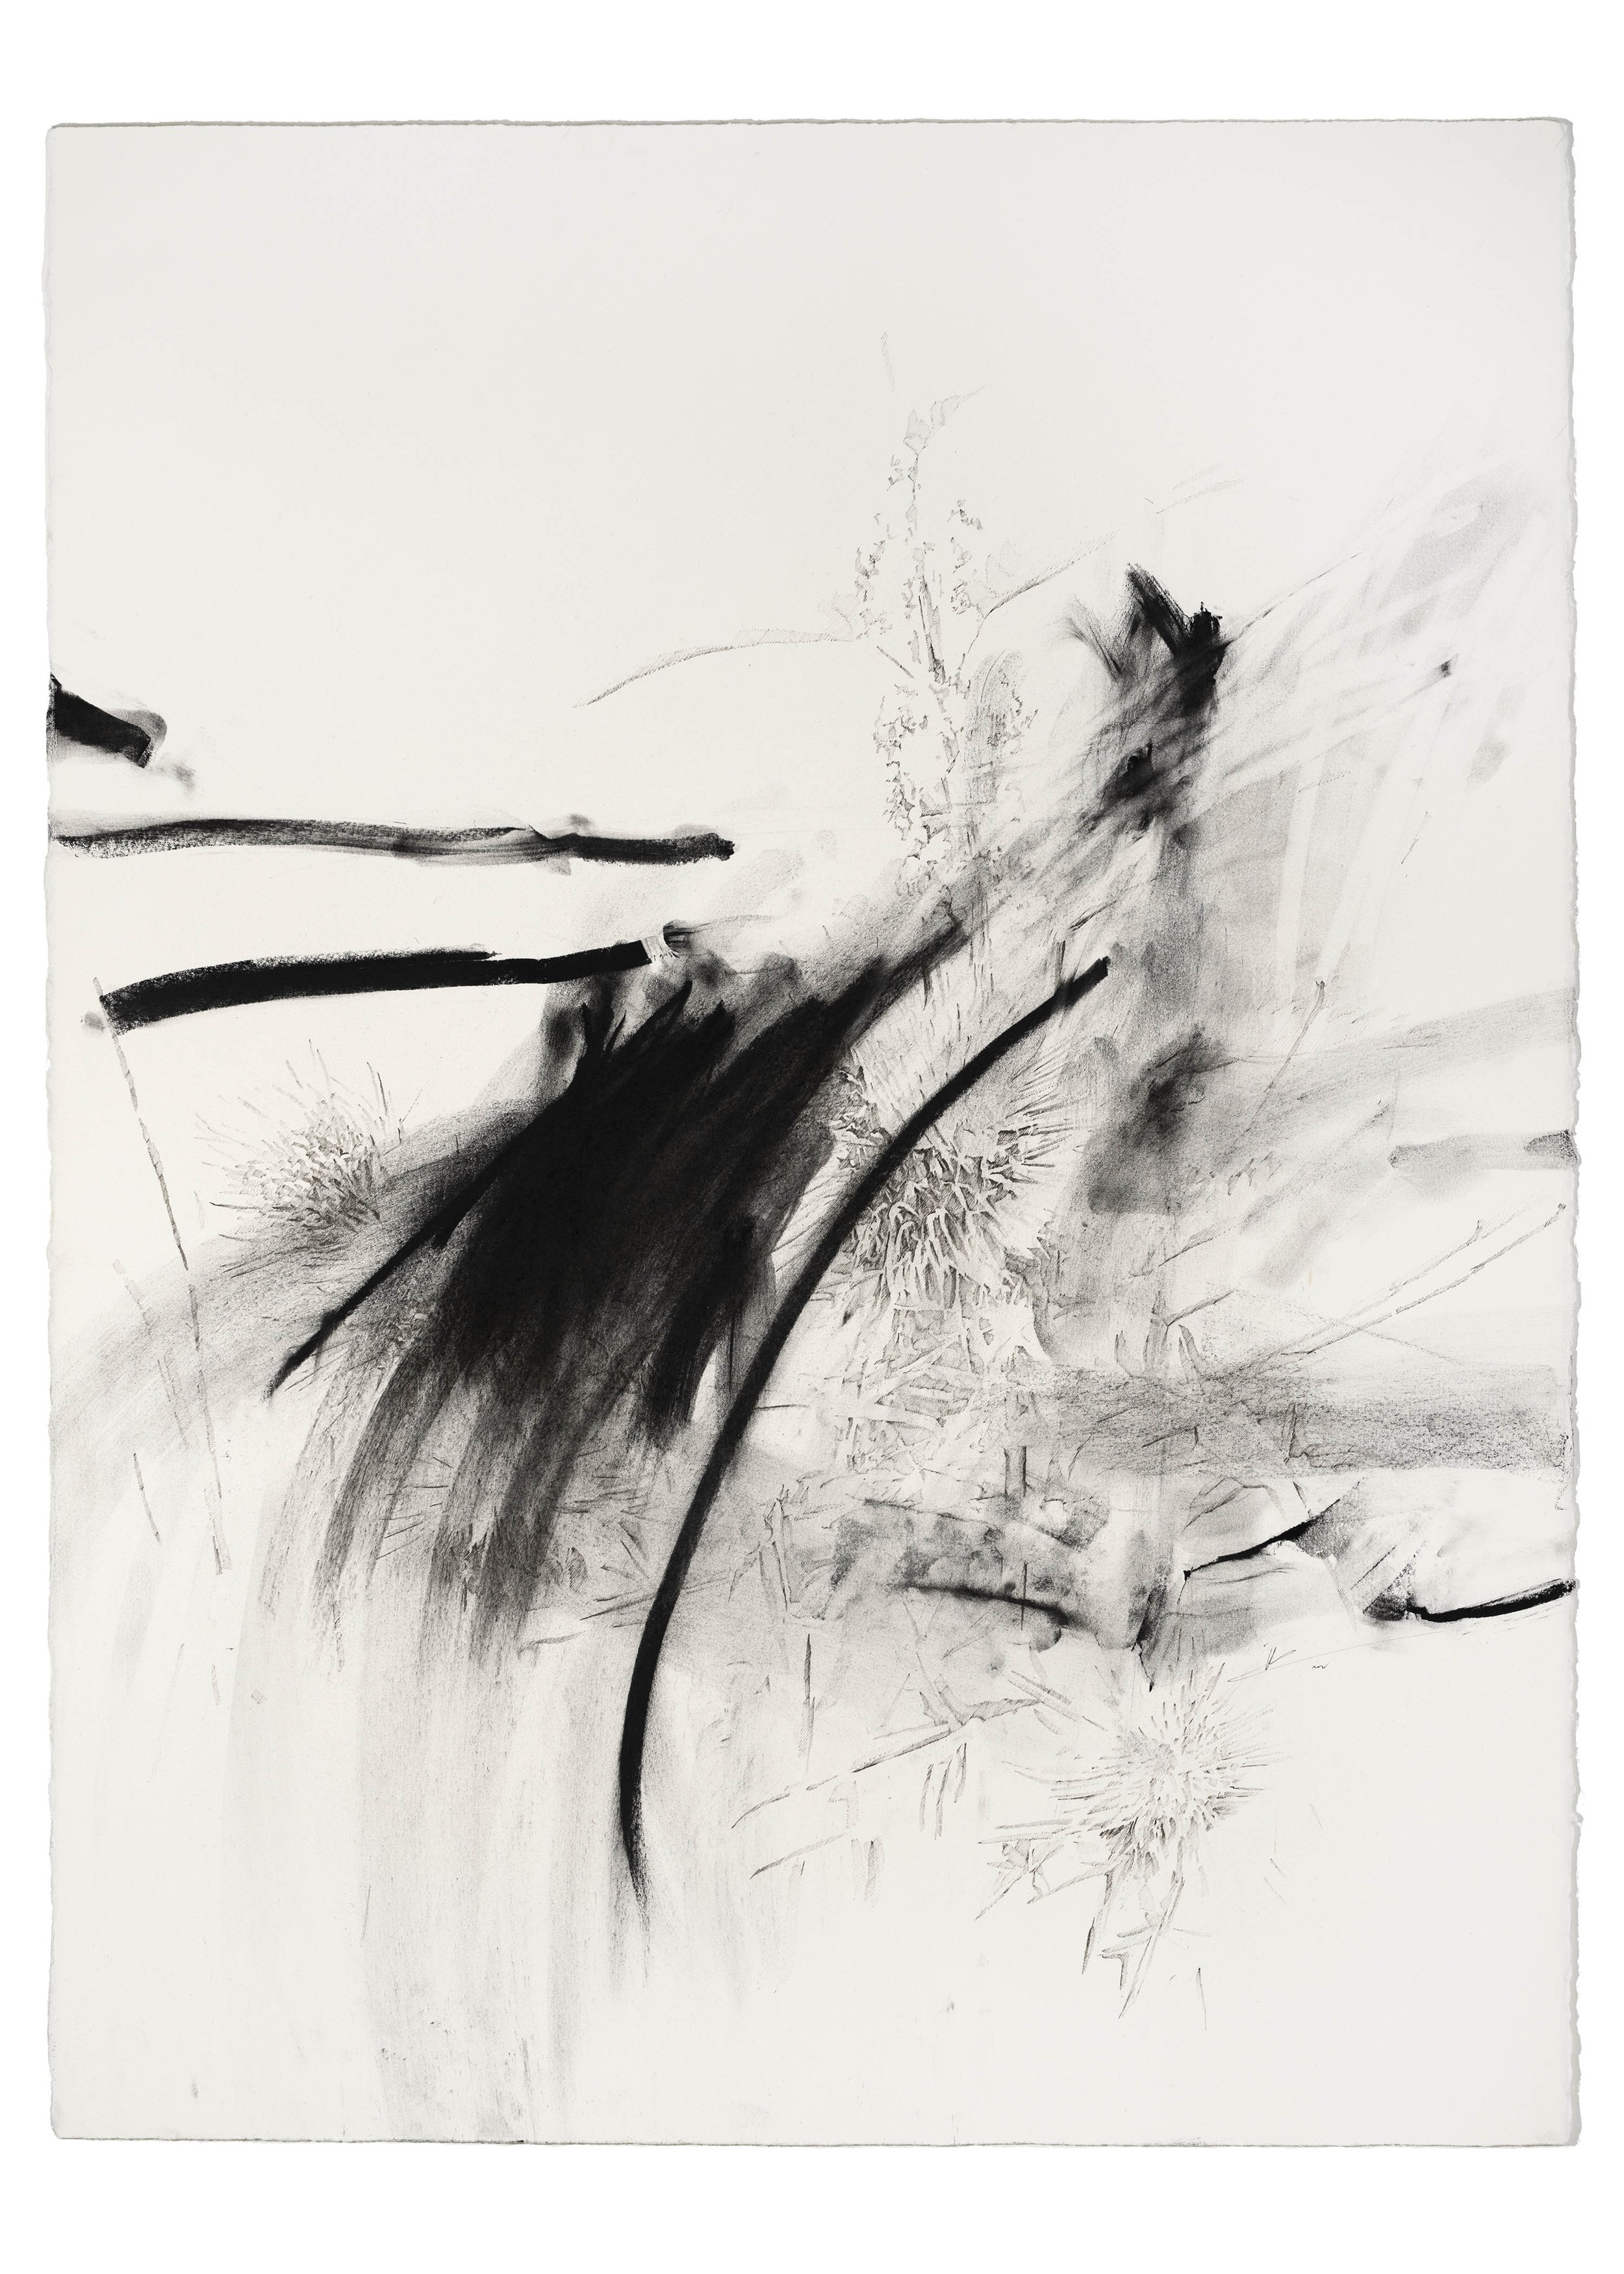 Imogen_Kotsoglo_Matter_Kolbusz_Space_Perth_MATTER 2 4 2022 (Thistle) - Ink and Charcoal on Arches Aquarelle - 76x56cm copy.jpg